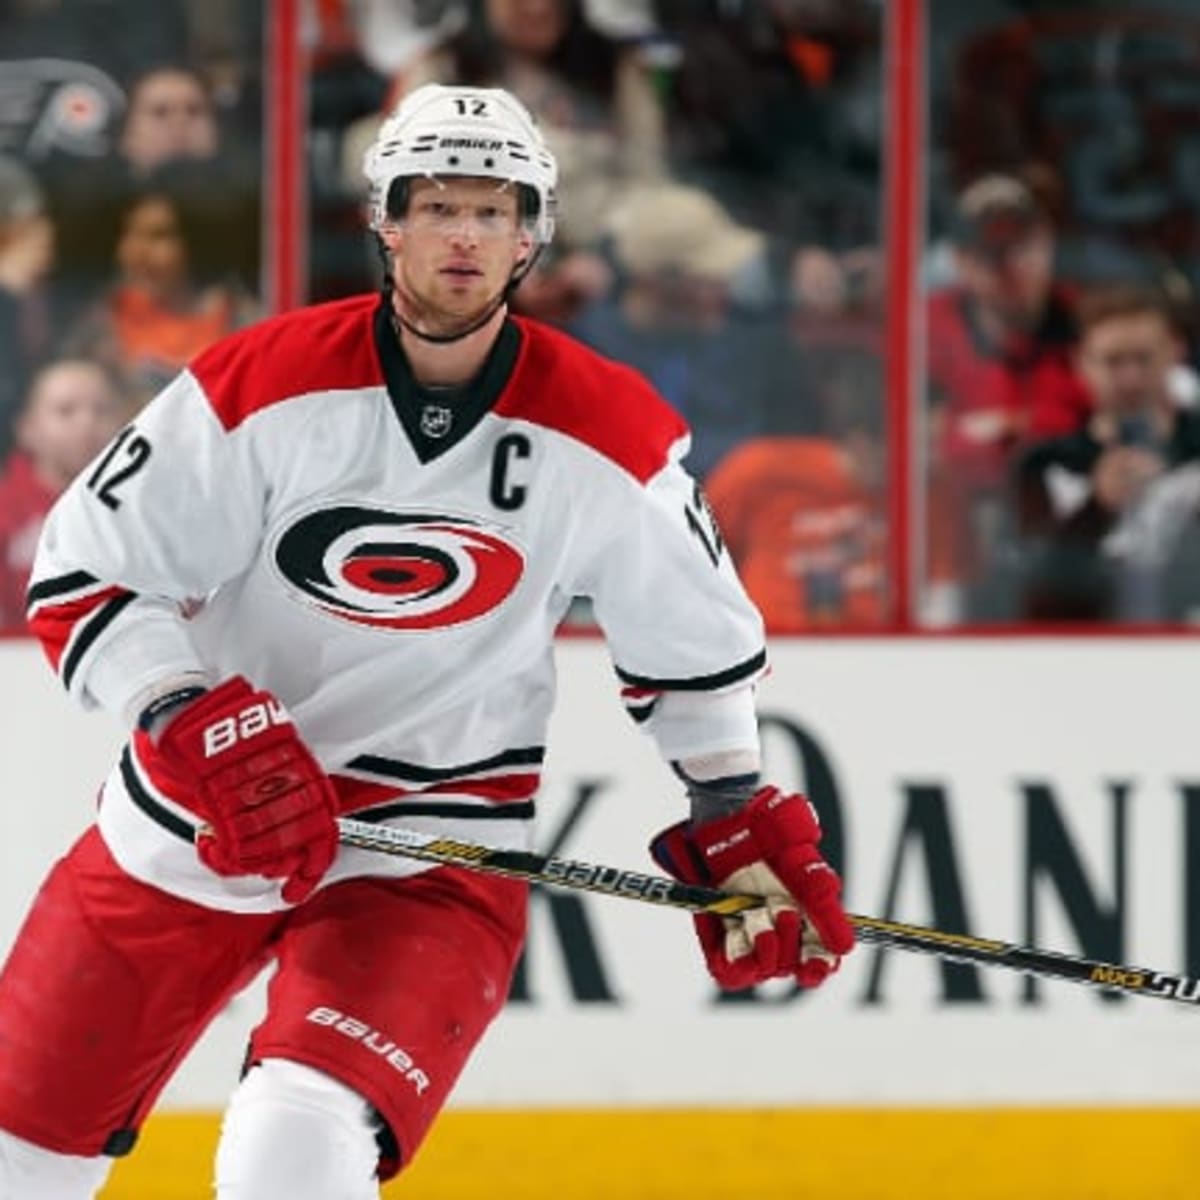 Does Eric Staal have a case to be considered for the Hockey Fall of Fame?